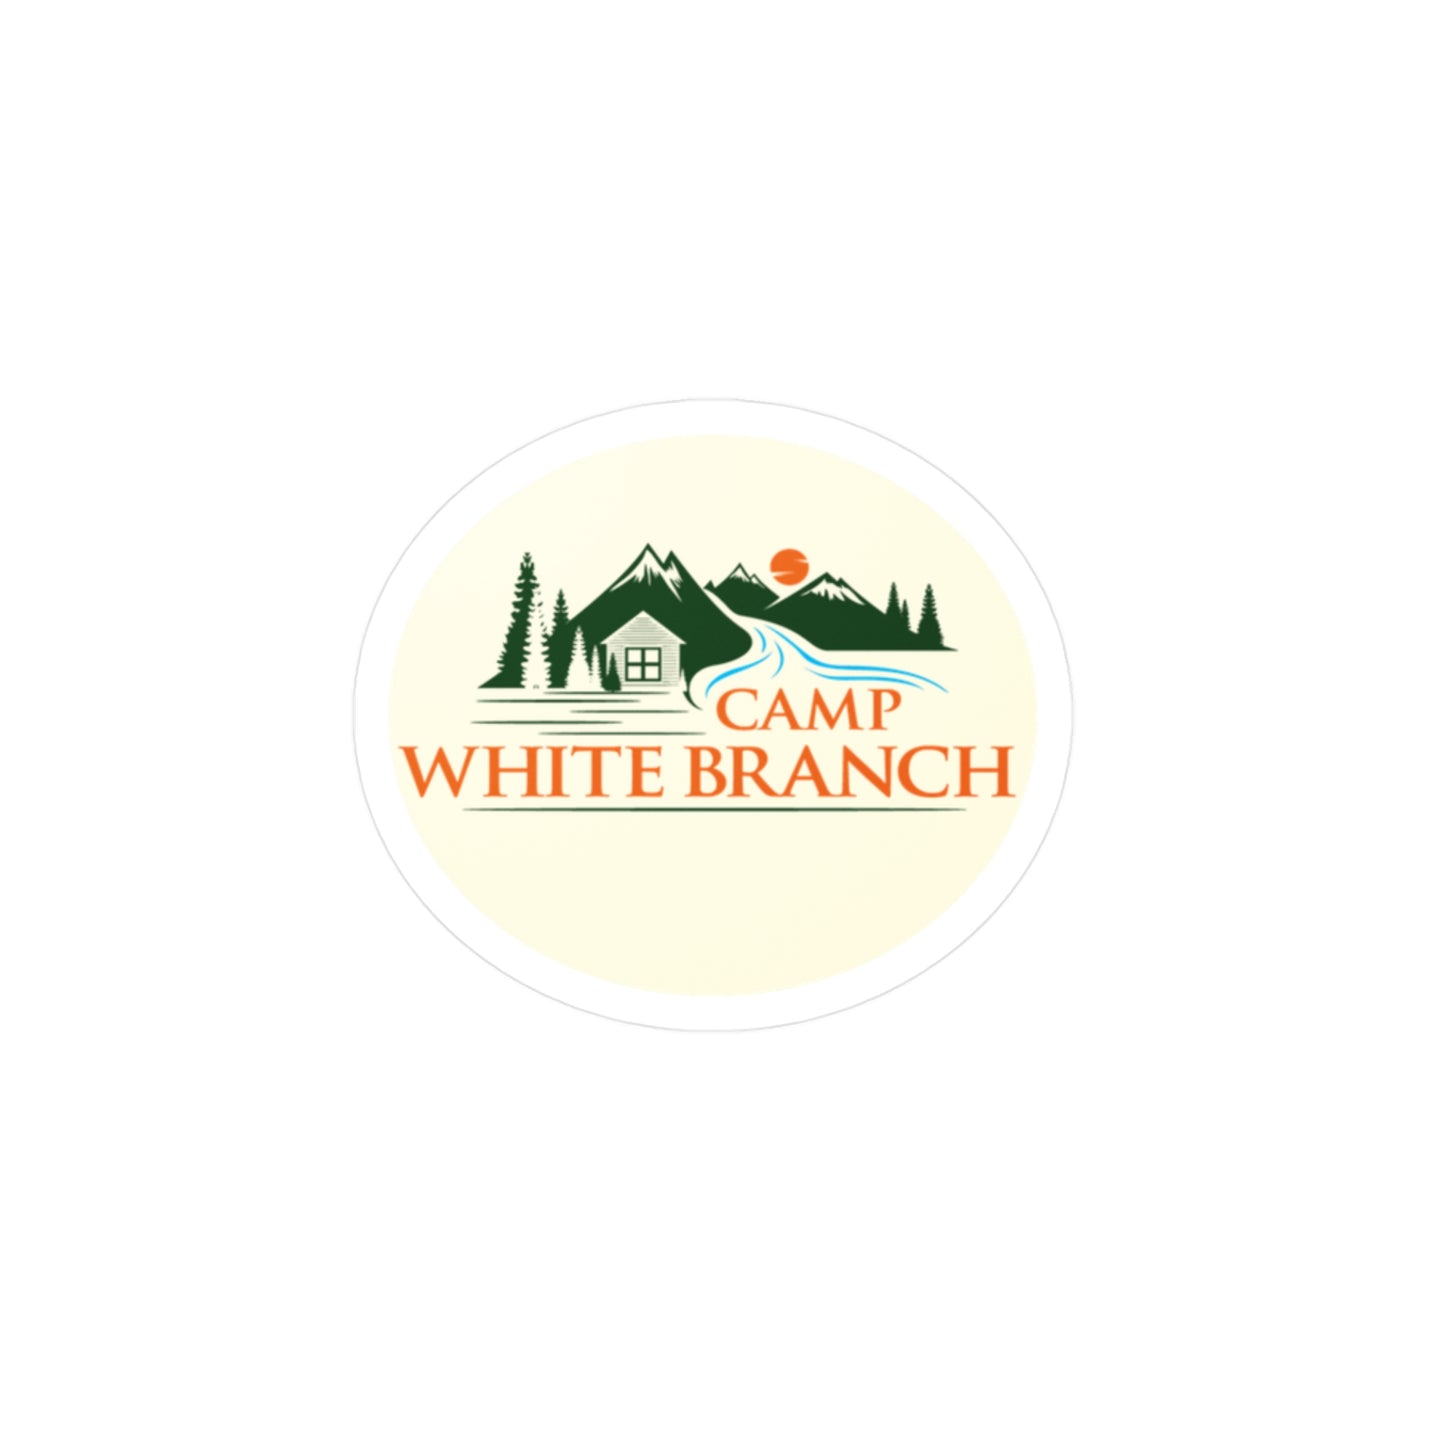 Camp White Branch Full Color Vinyl Decal